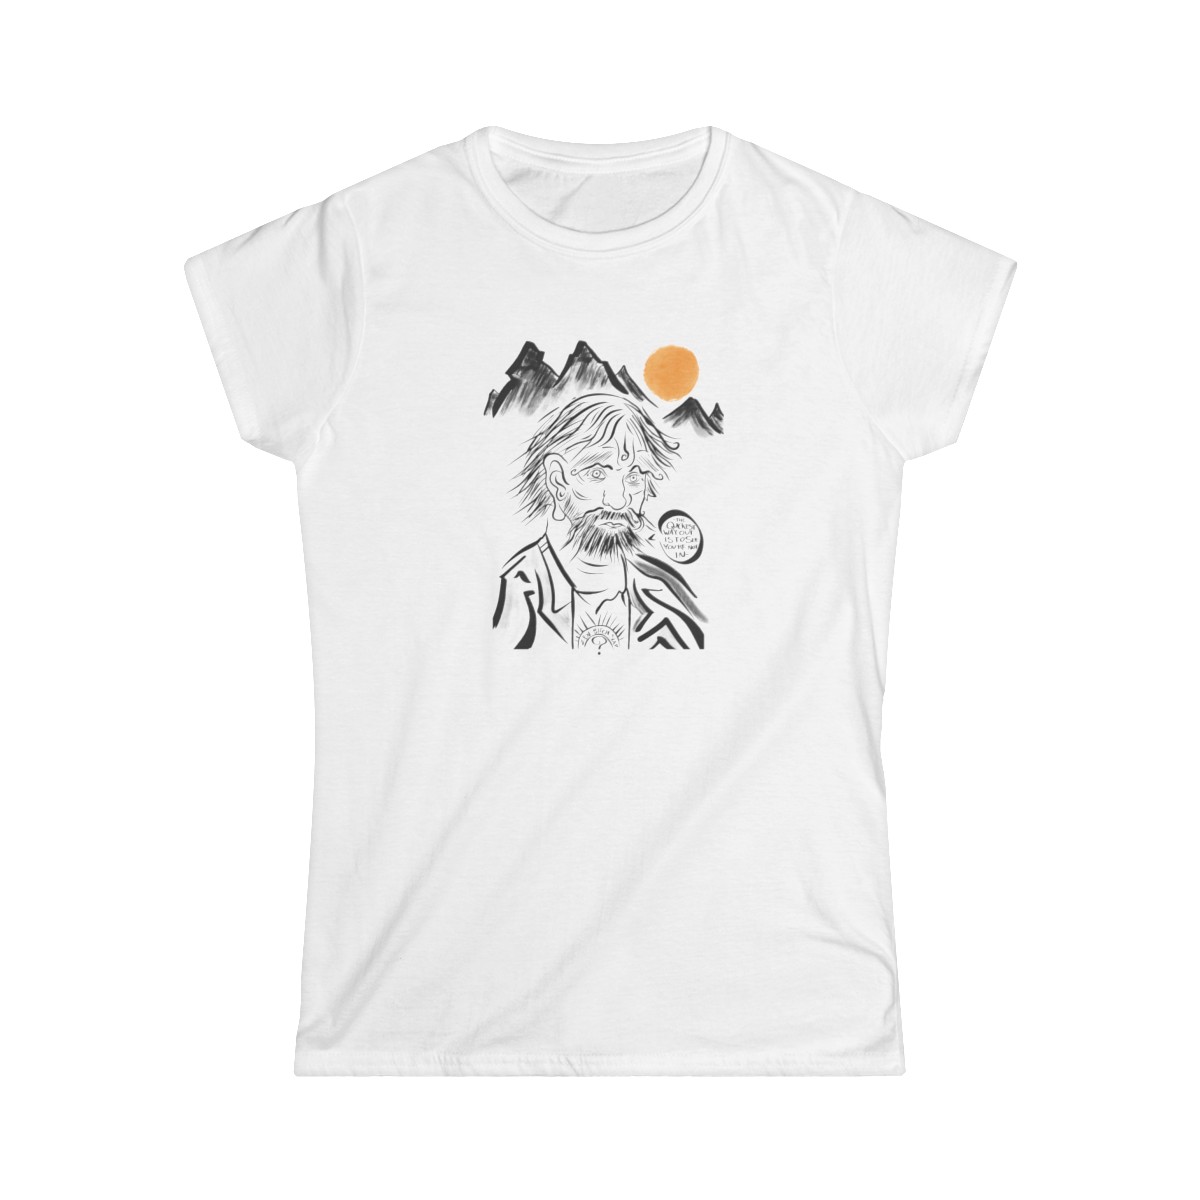 Paul Bodhidharma - Women's Softstyle Tee: Color Image product main image